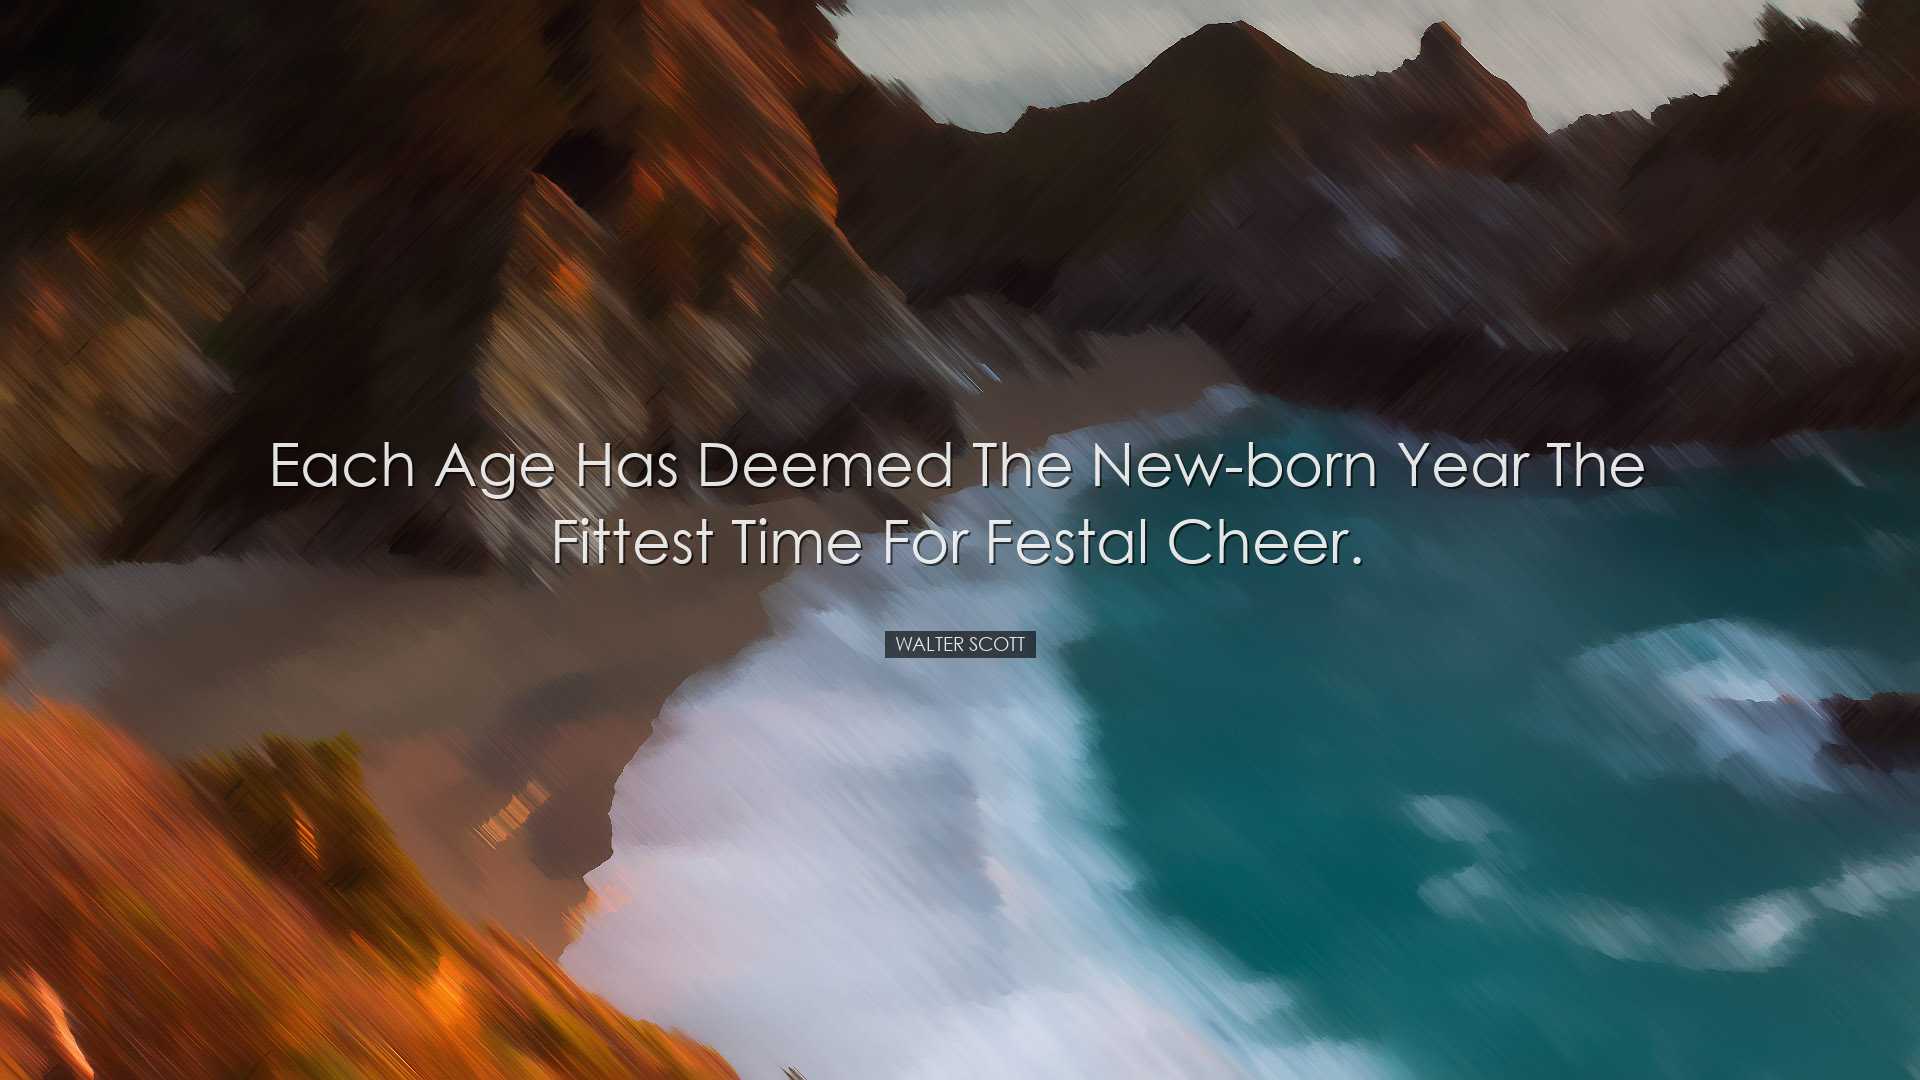 Each age has deemed the new-born year the fittest time for festal